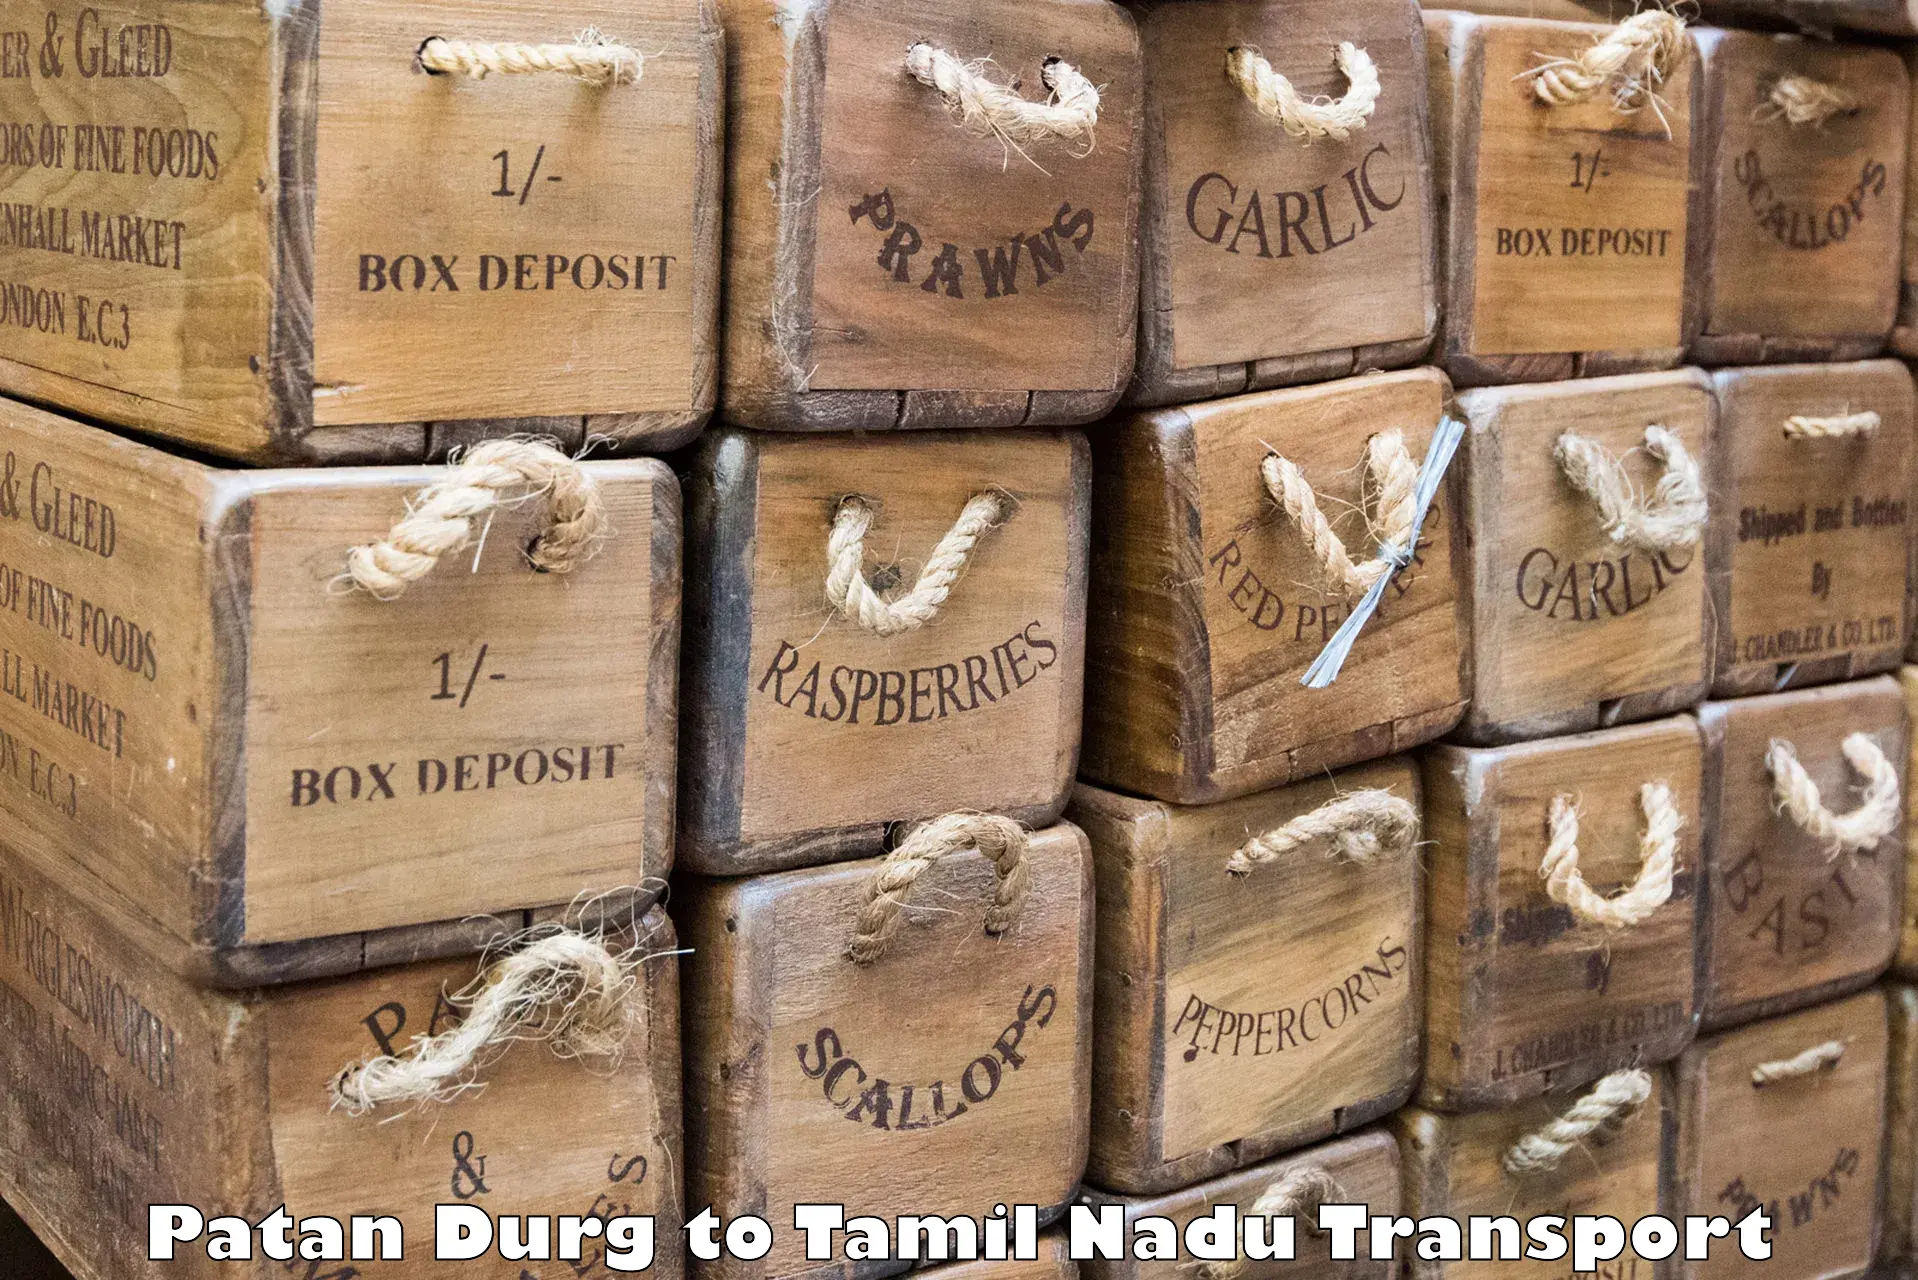 Delivery service Patan Durg to Tamil Nadu